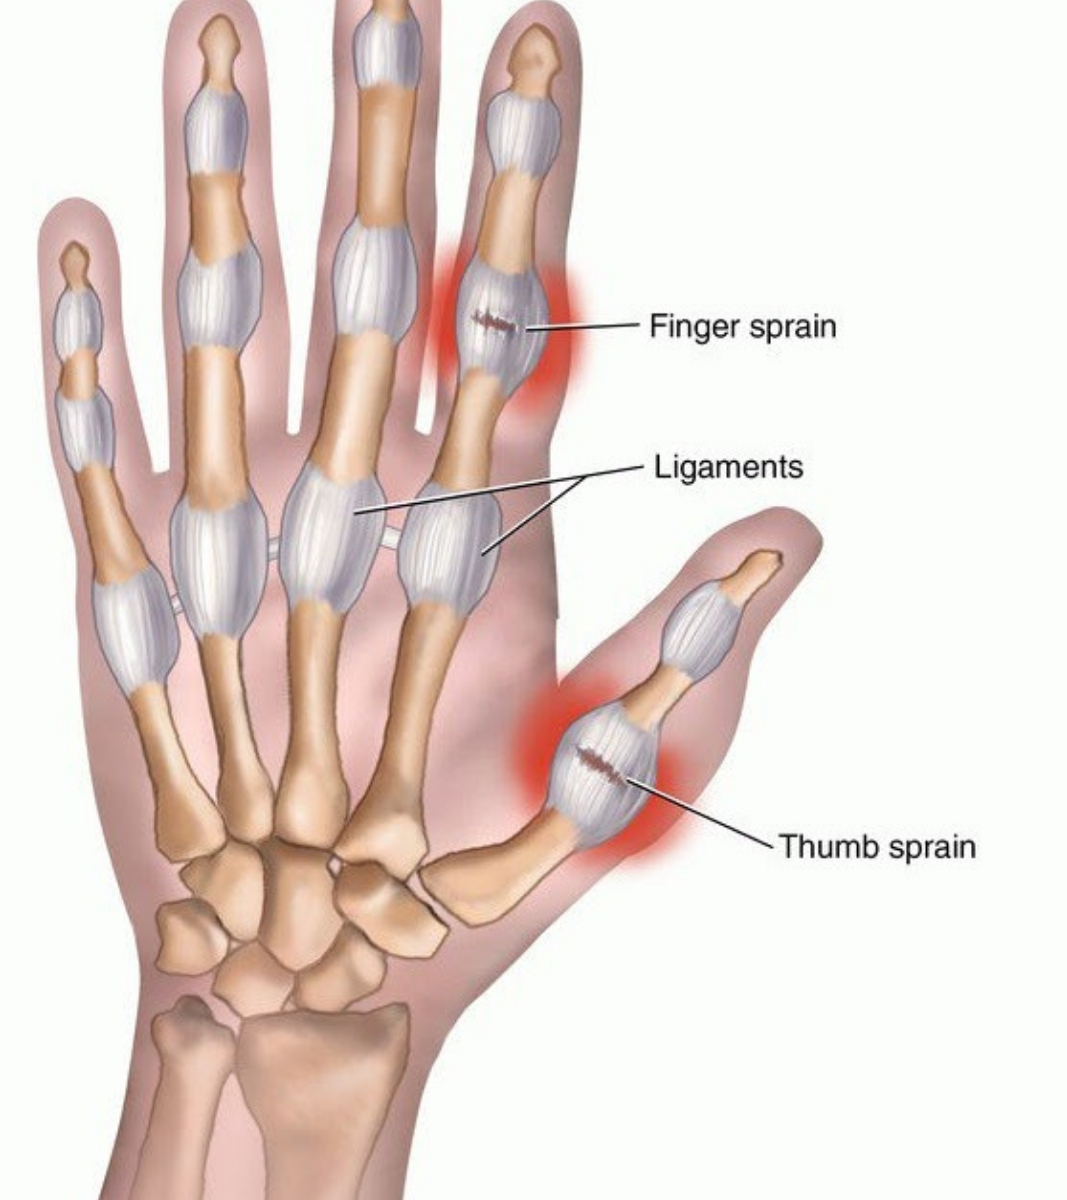 Sprained thumb, Thumb sprain, sprained thumb, causes of sparined thumb, symptoms of spained thumbs, care for sprained thumbs